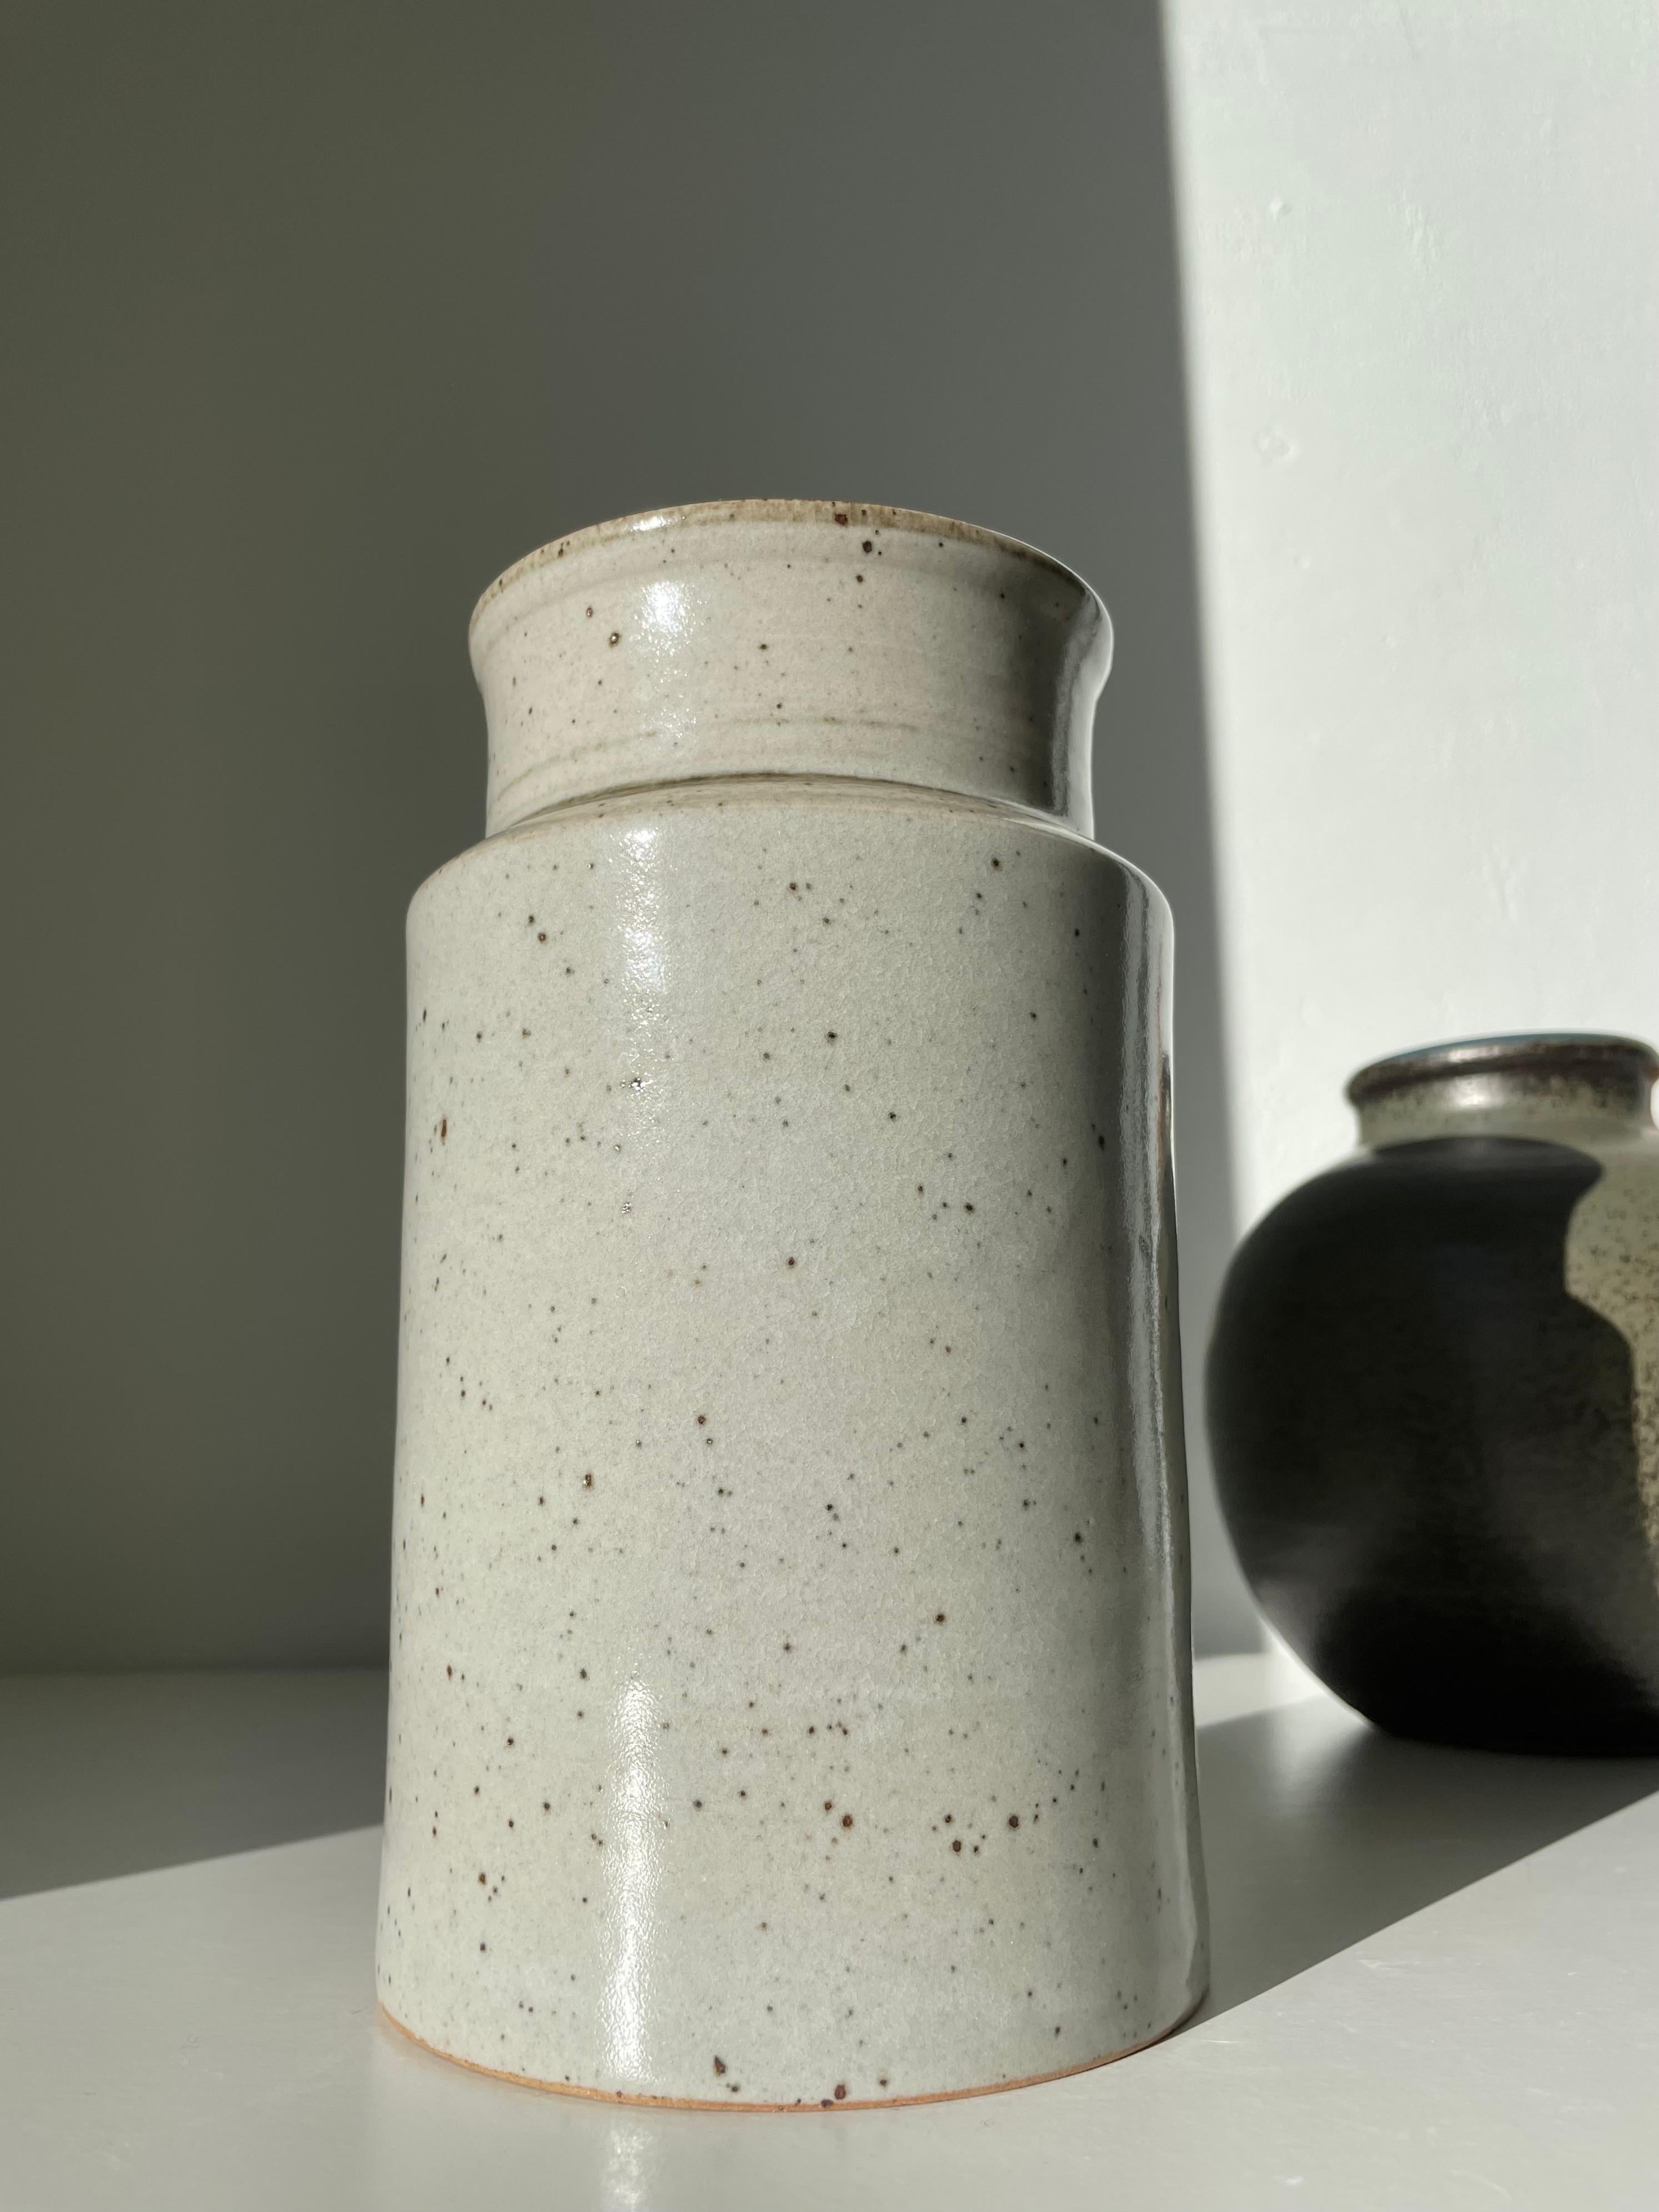 Stunning light gray, warm brown spotted shiny glaze on this classic Midcentury Modern large jar vase by ceramic artist Trude Barner Jespersen (1938-1997). Handmade, clean, functional cylinder shape in neutral earthtoned colors. Jespersen worked for